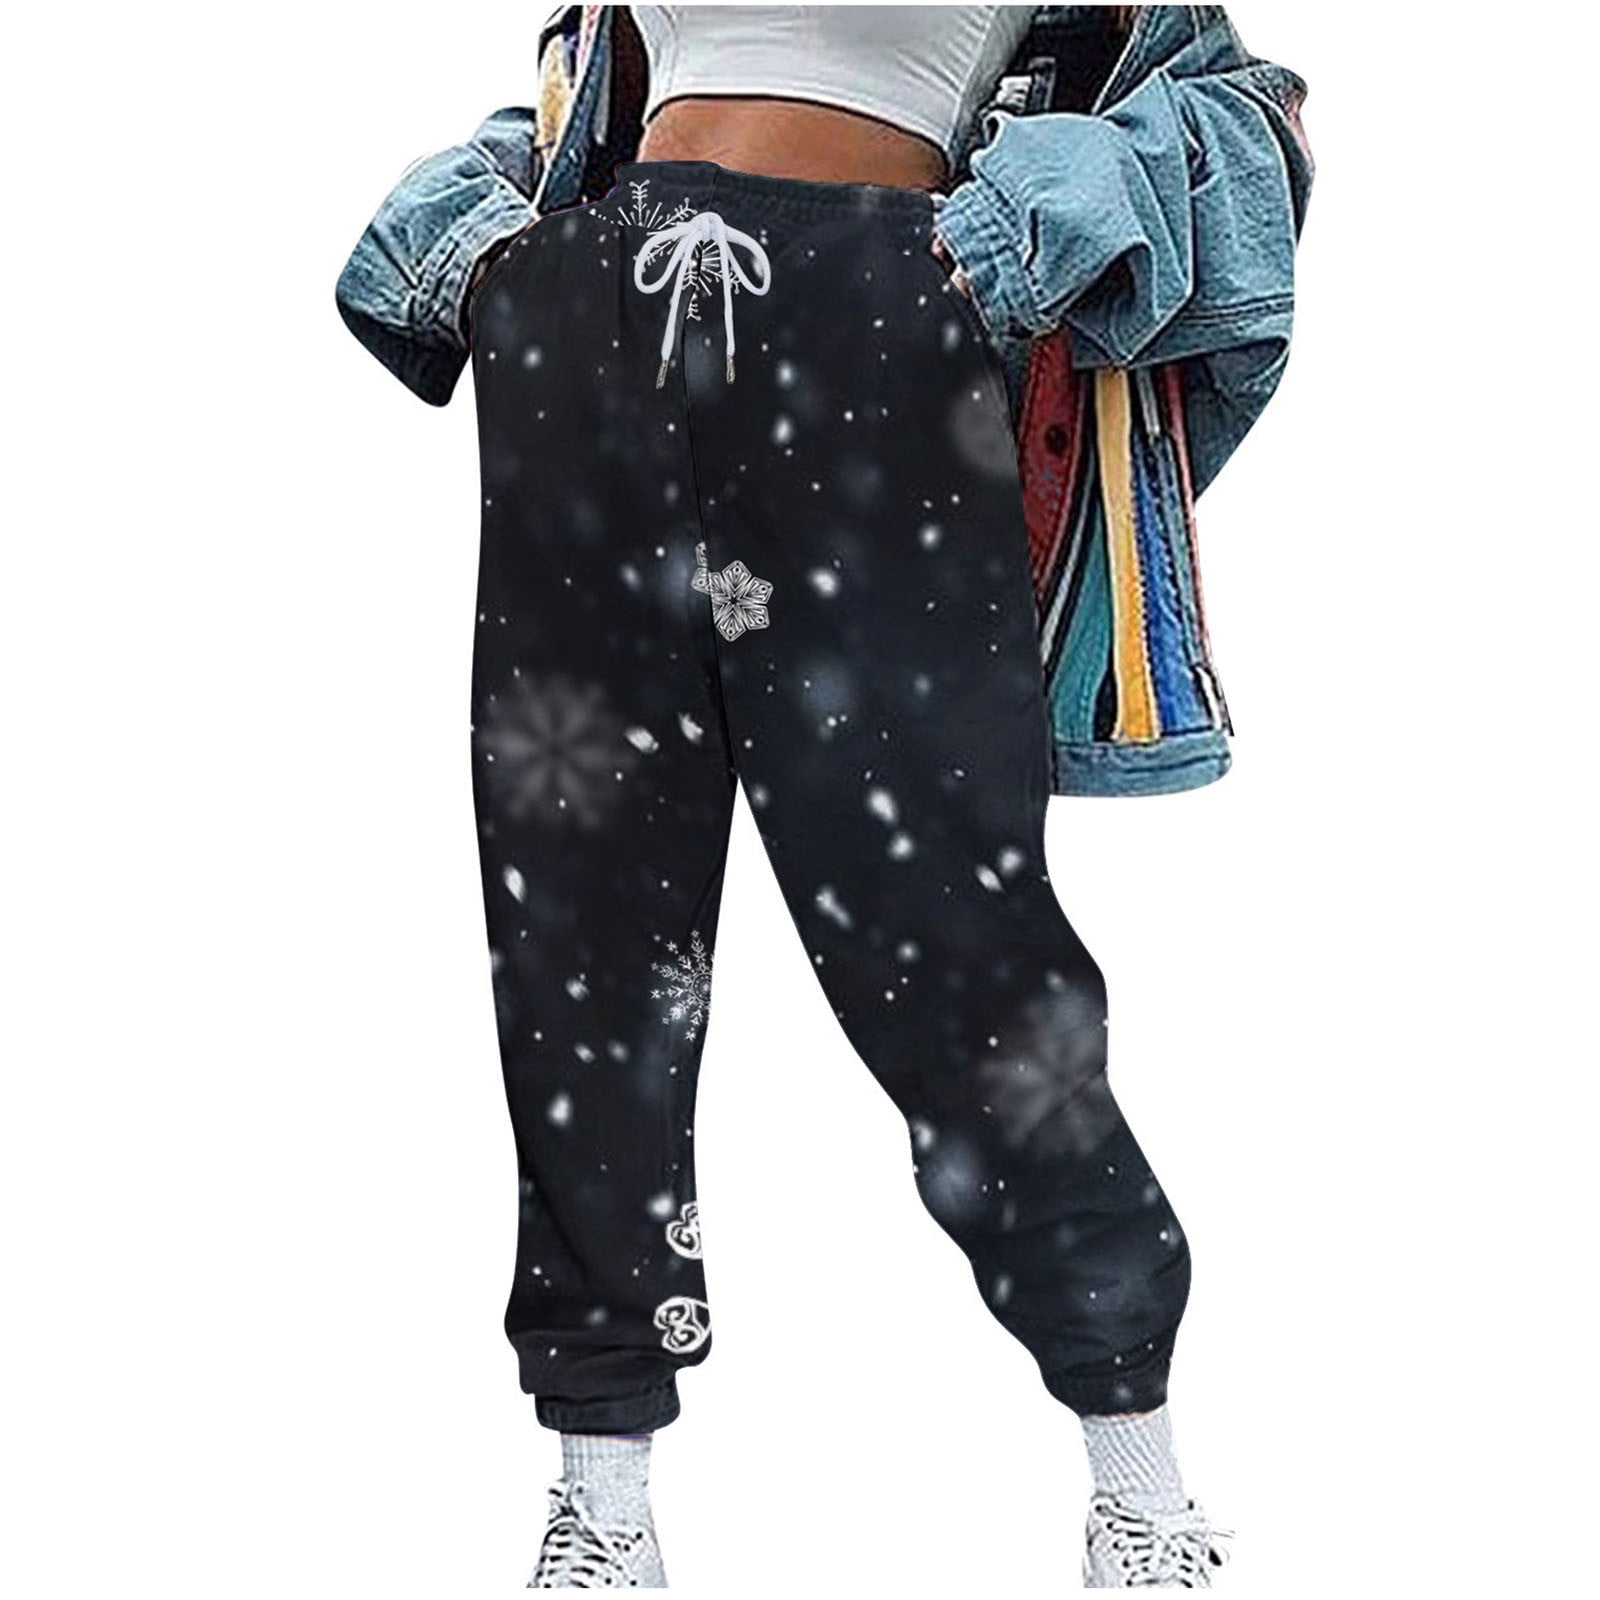 RQYYD Womens Baggy Drawstring Sweatpants Floral Print High Waisted Joggers  Pants Athletic Casual Lounge Trousers with Pockets Black XL 